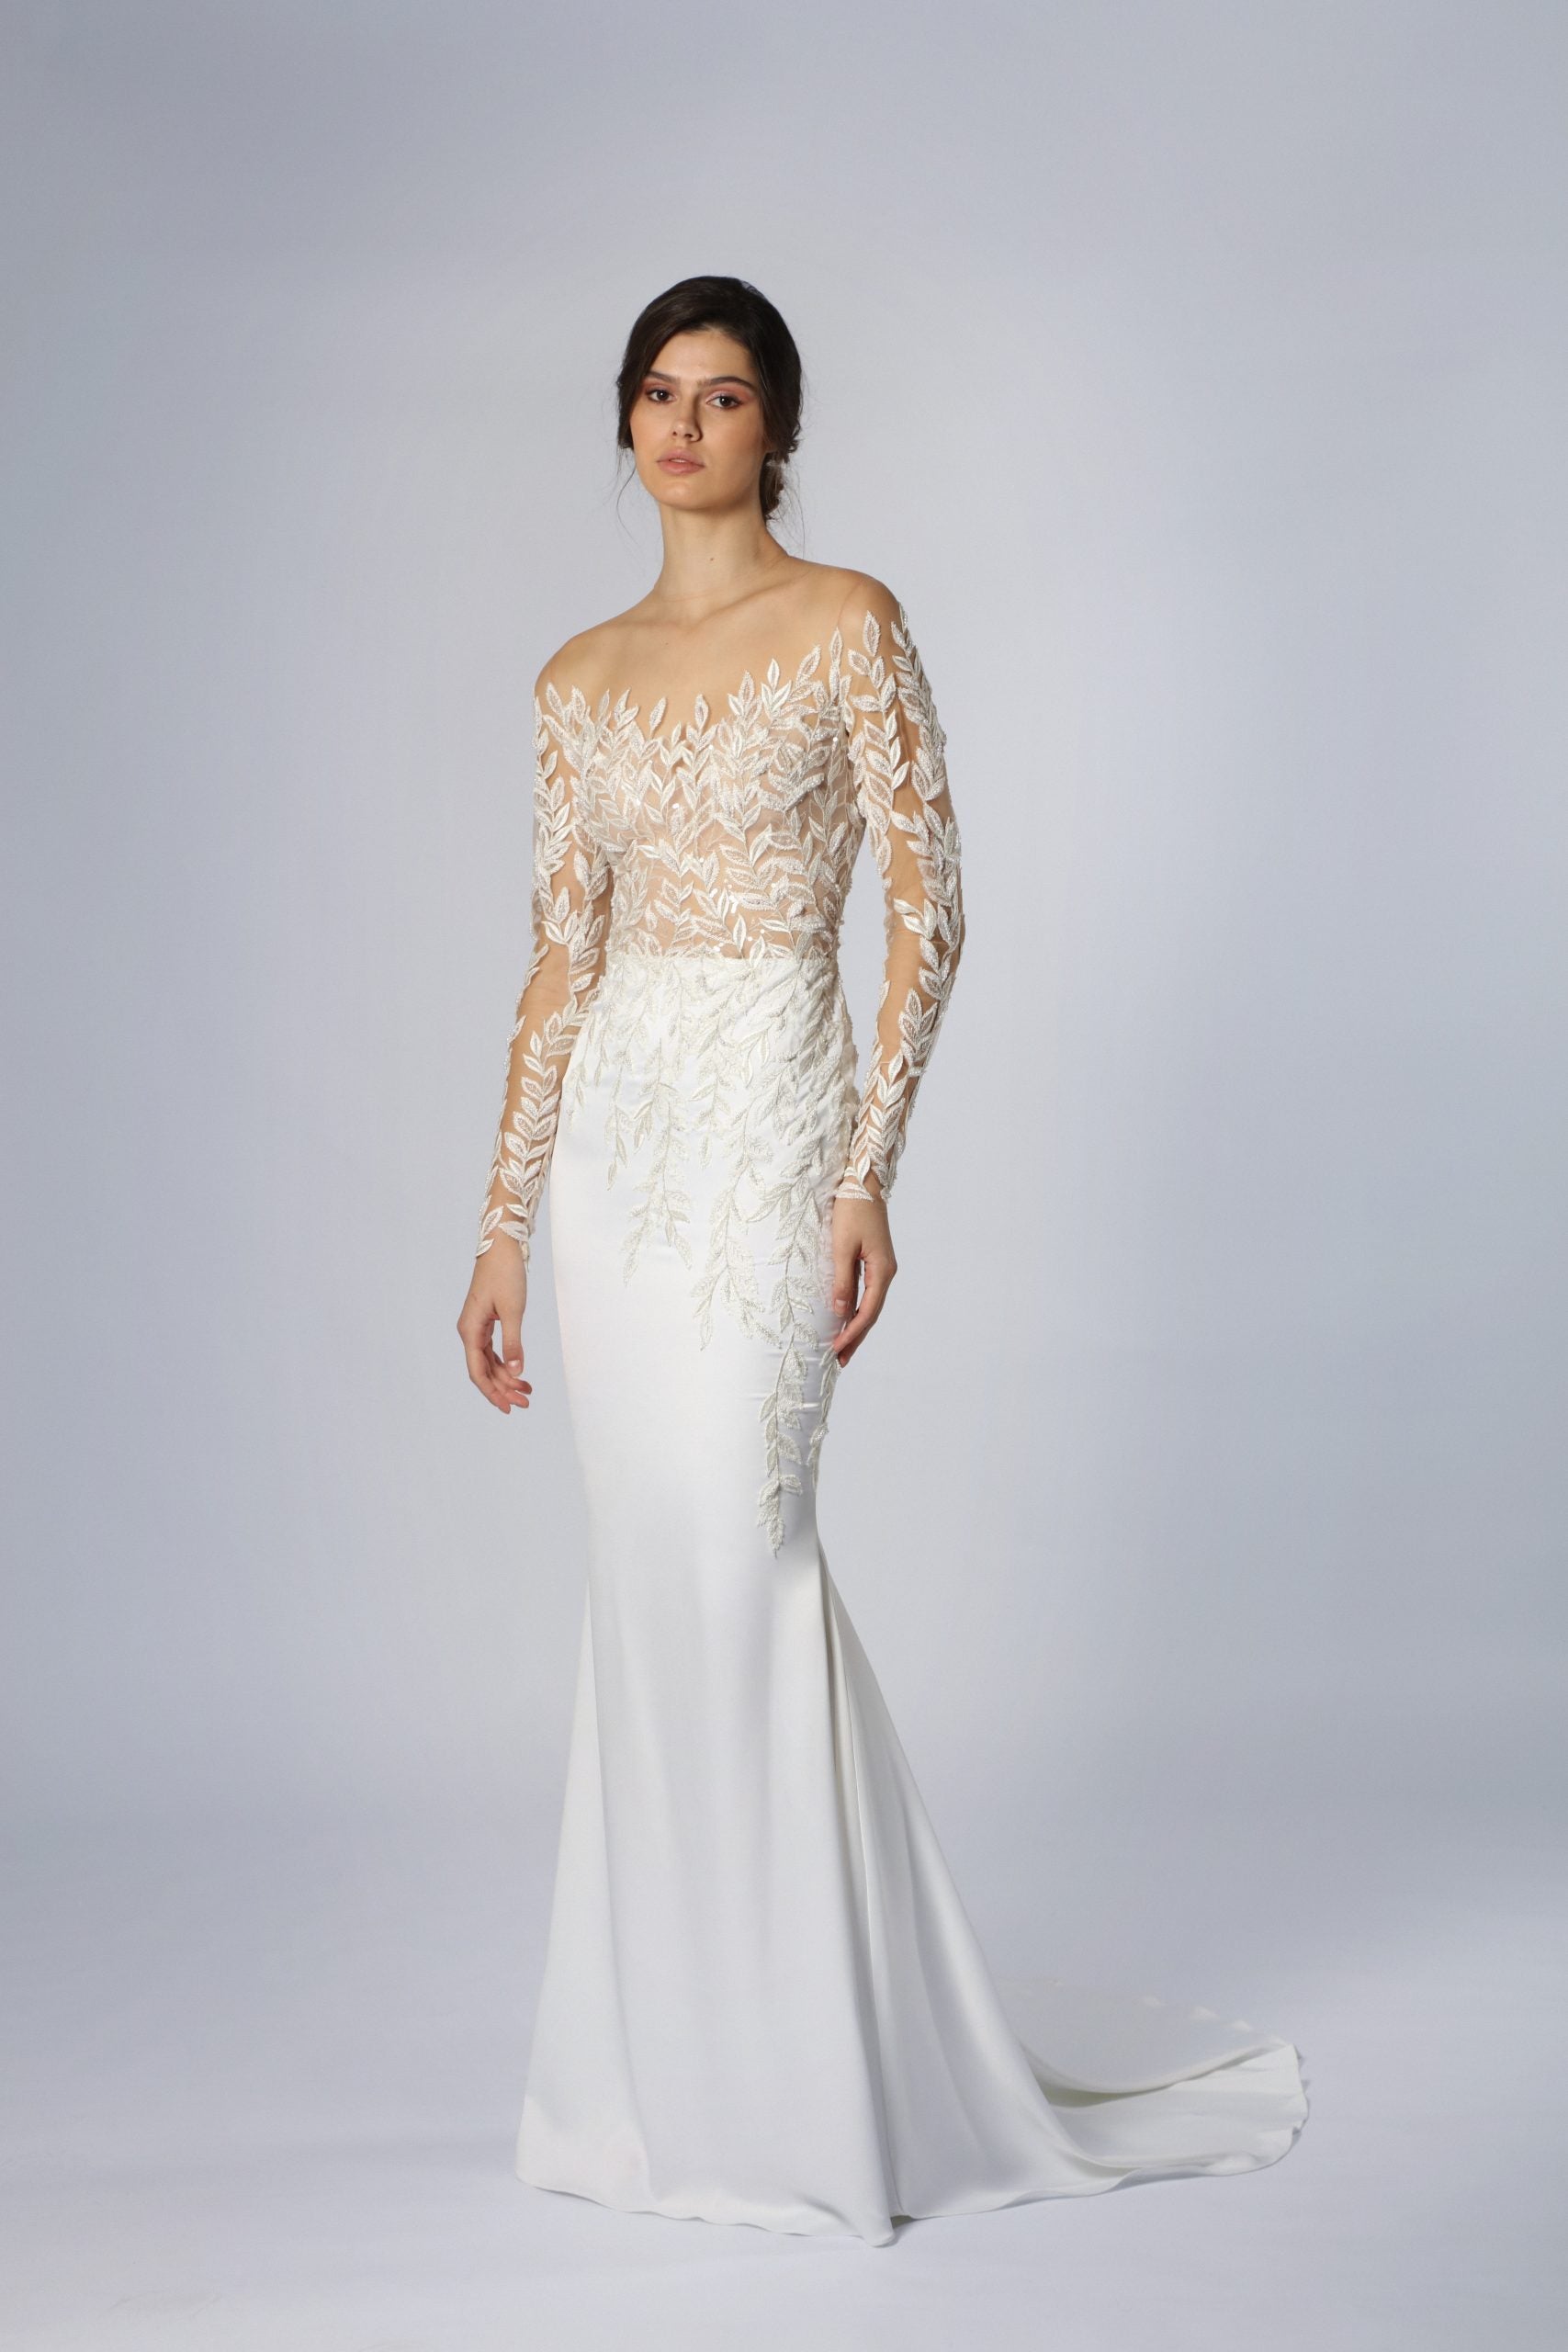 Illusion Long Sleeve Fit-And-Flare Gown by Tony Ward - Image 1